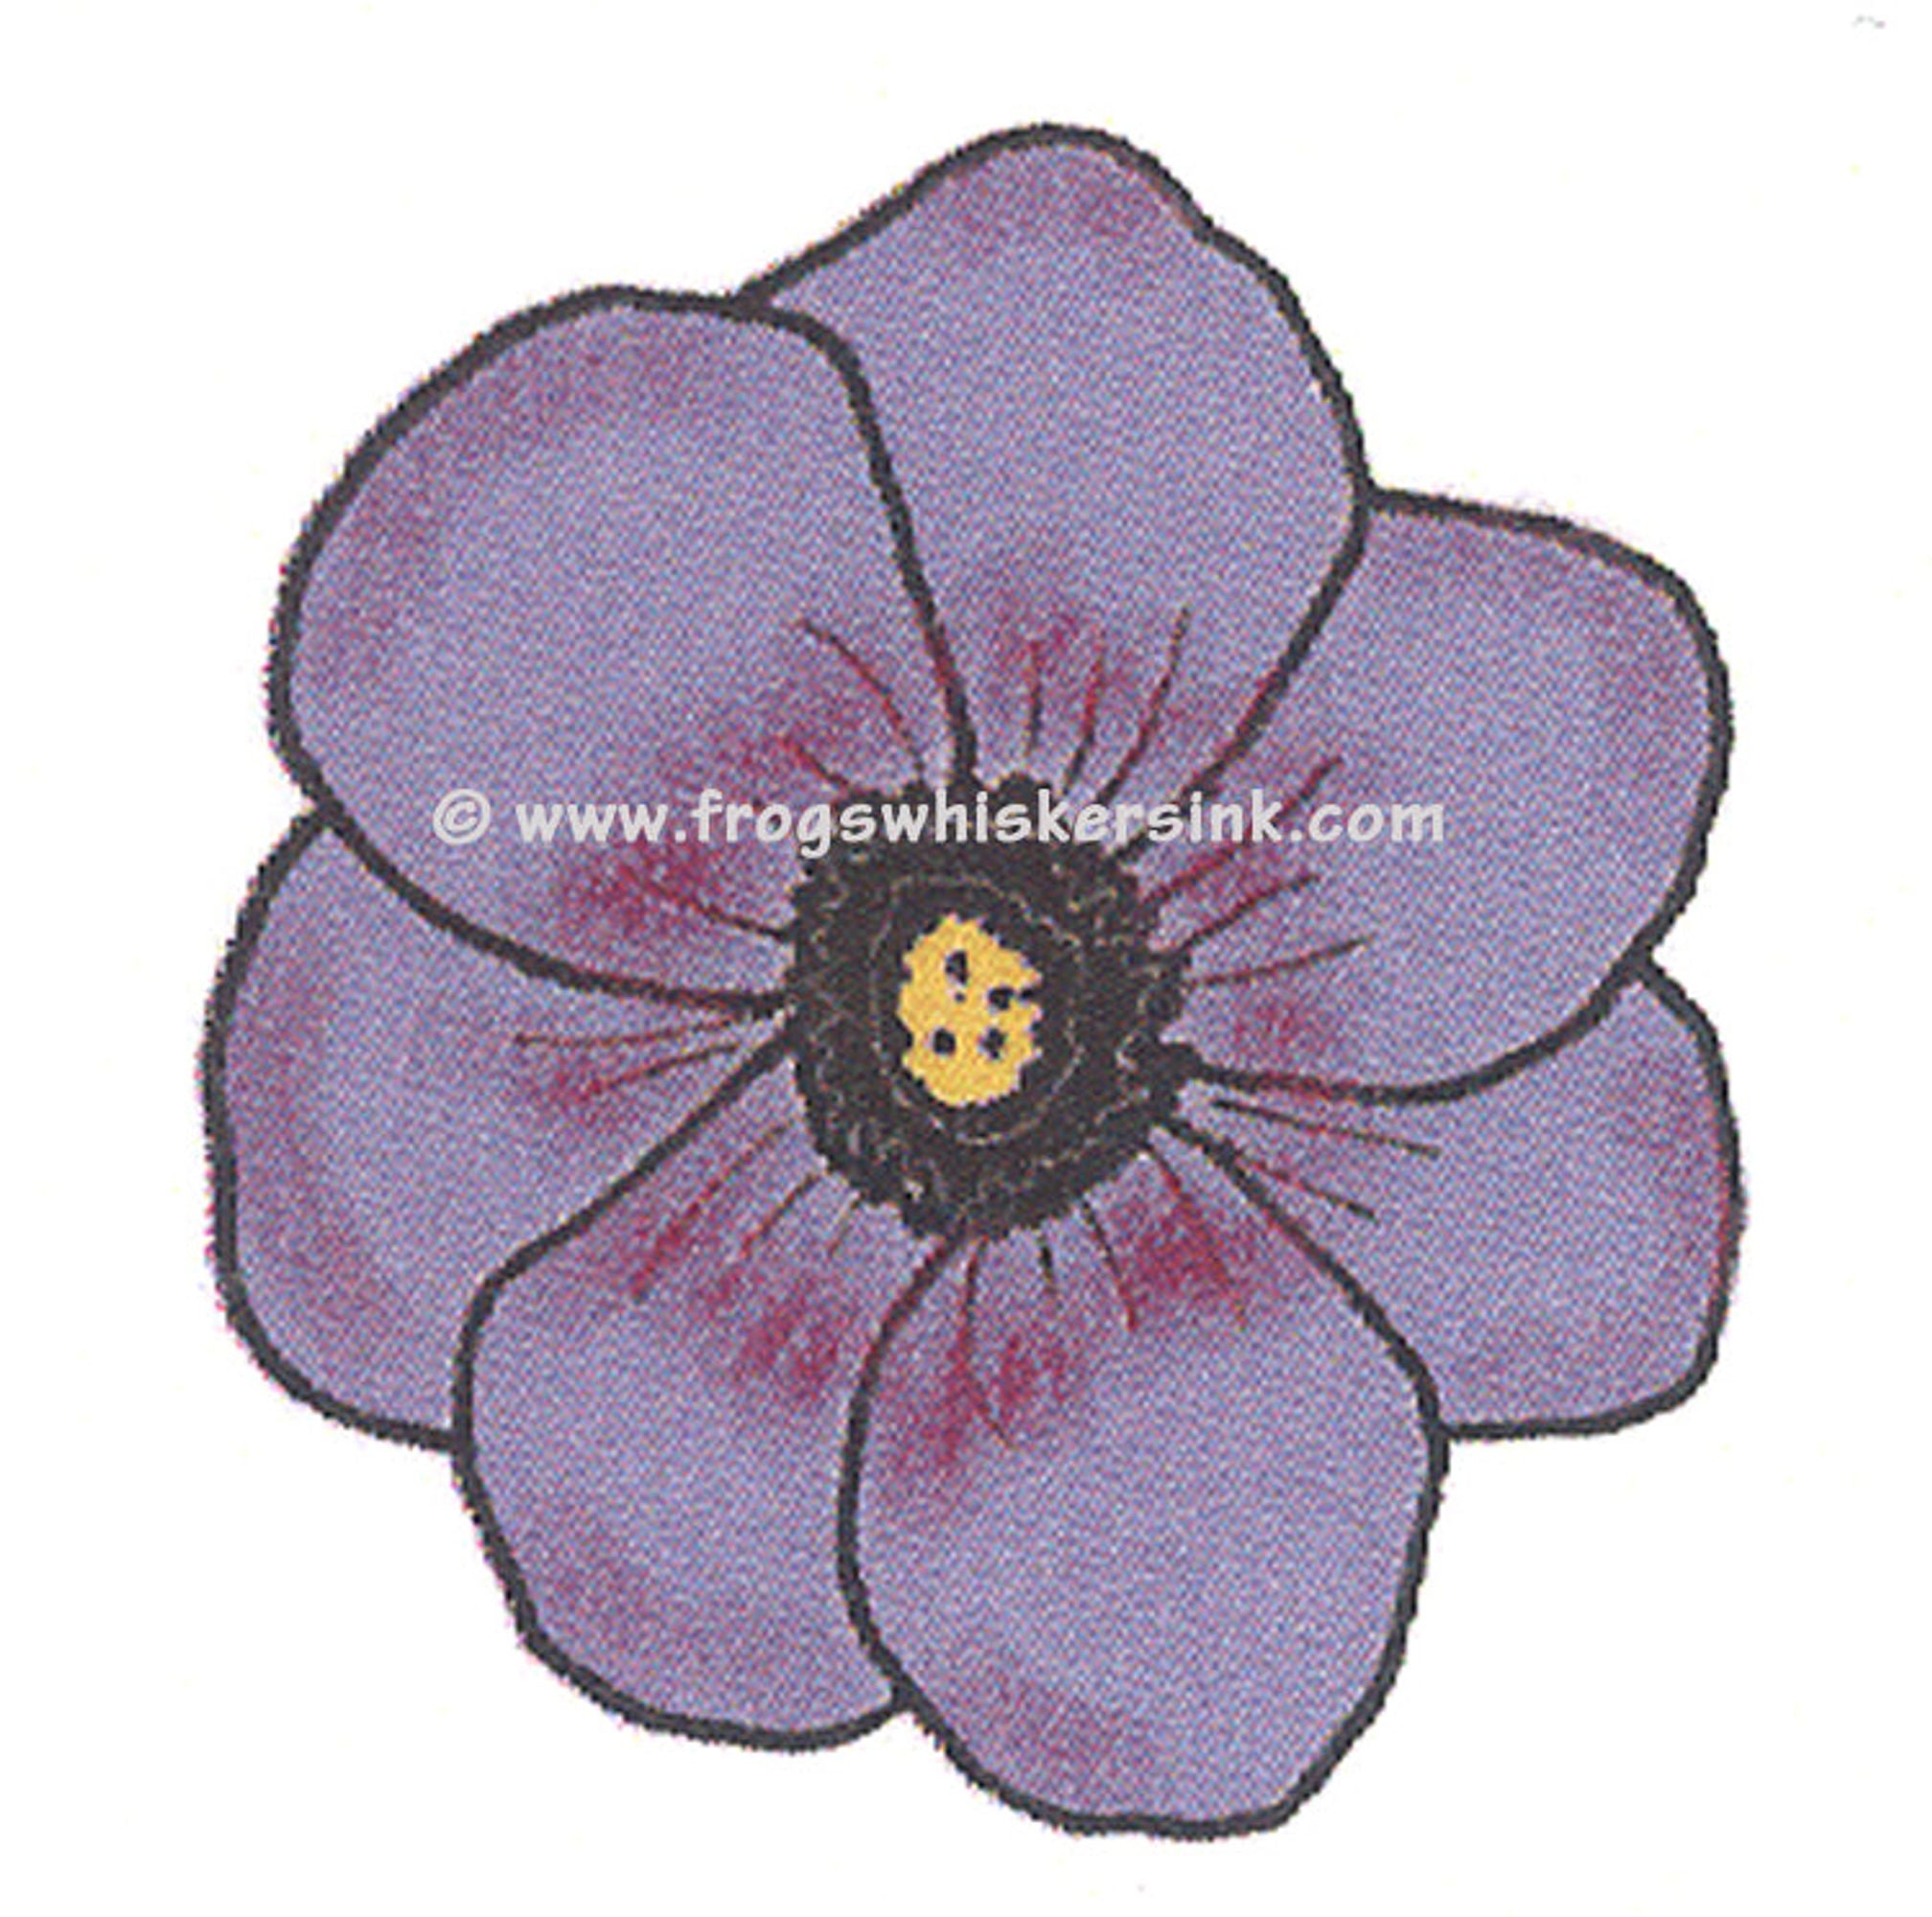 Frog's Whiskers Ink Stamps - Anemone Single